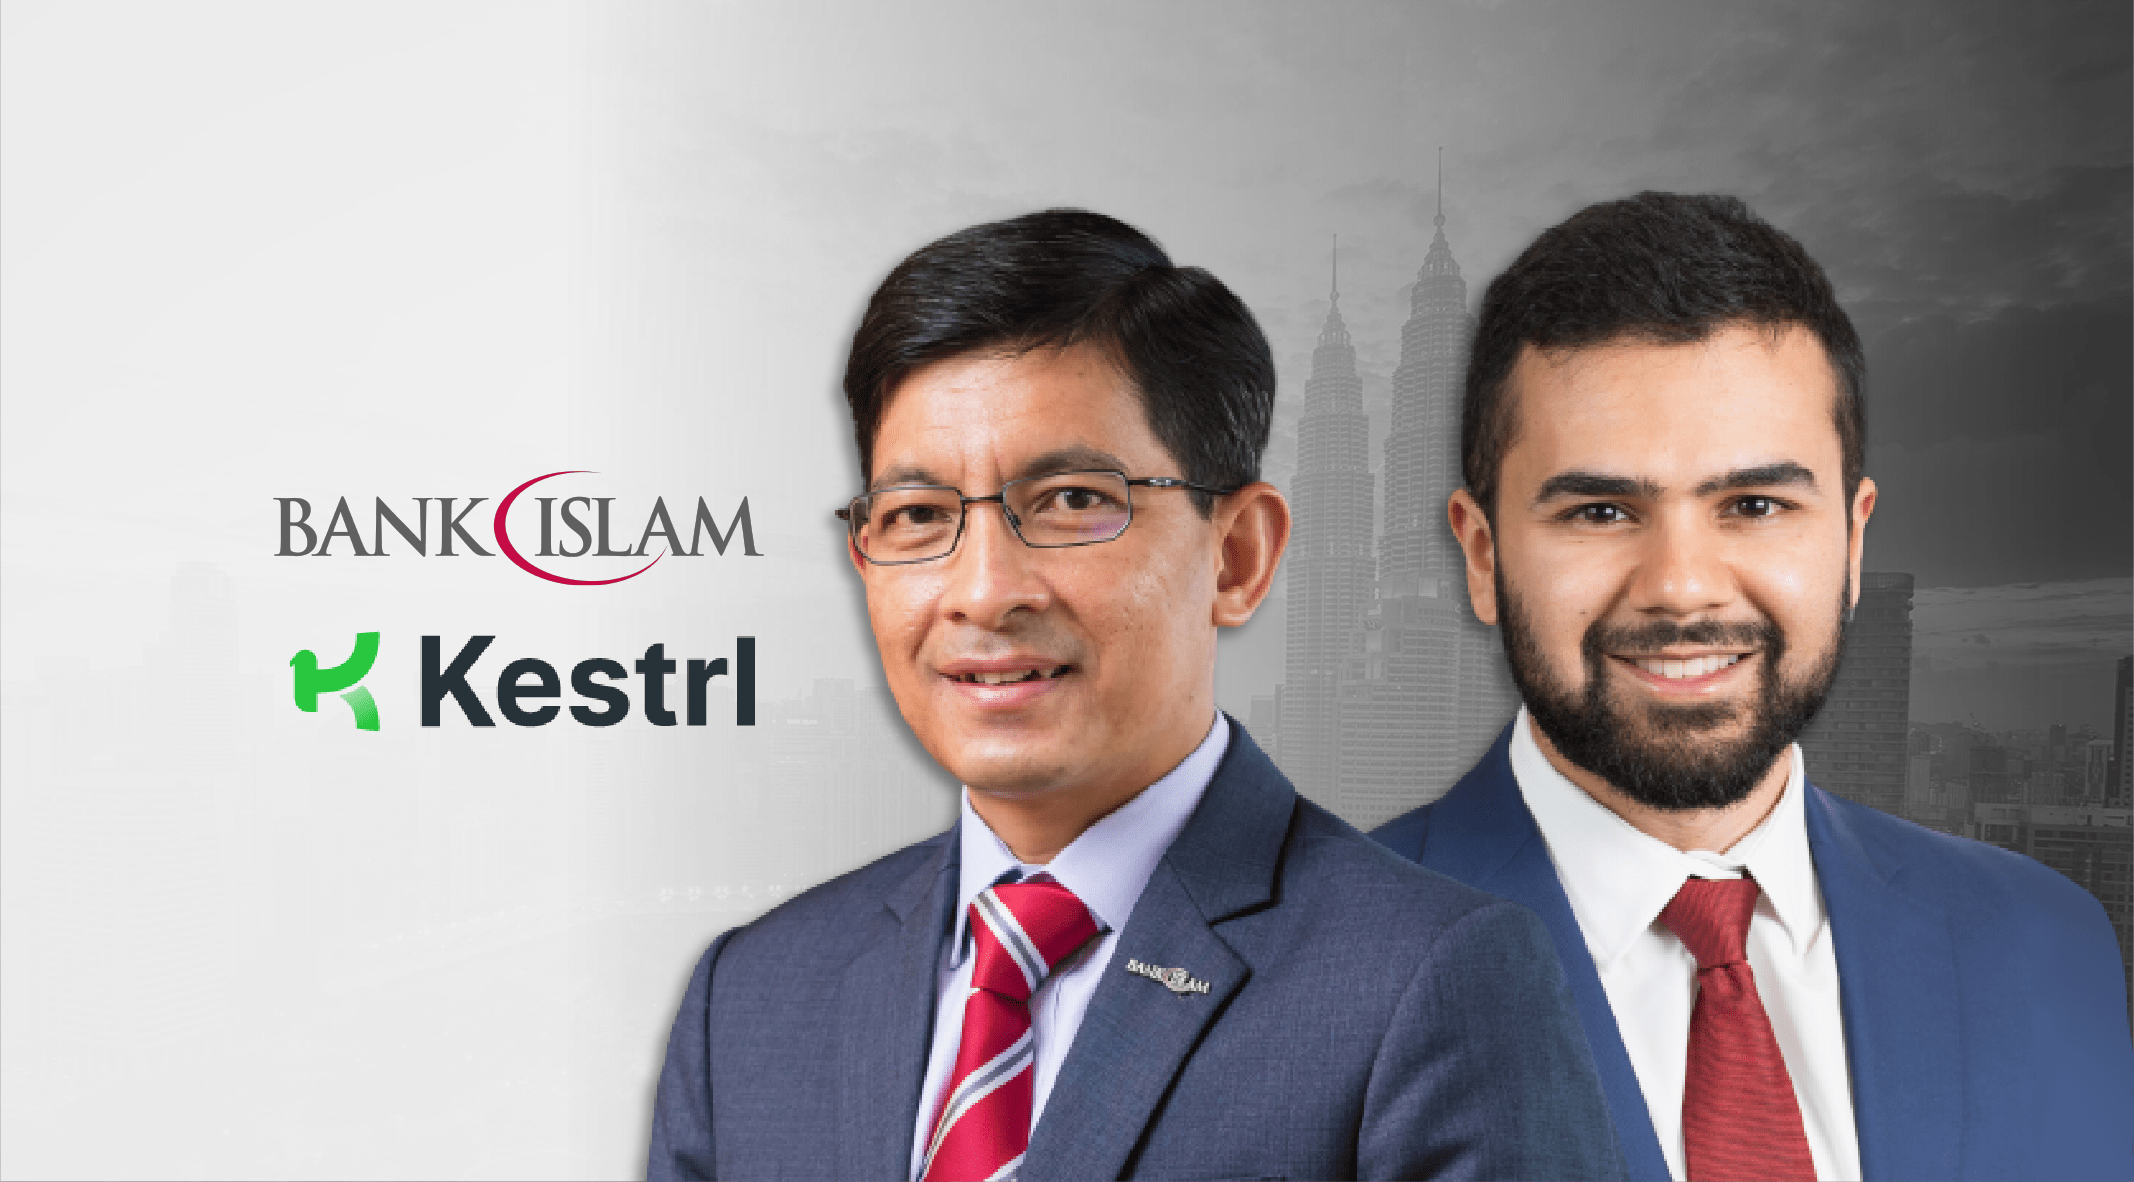 Bank Islam Partners With UK Islamic Fintech Kestrl to Expand Be U’s Personalised Solutions